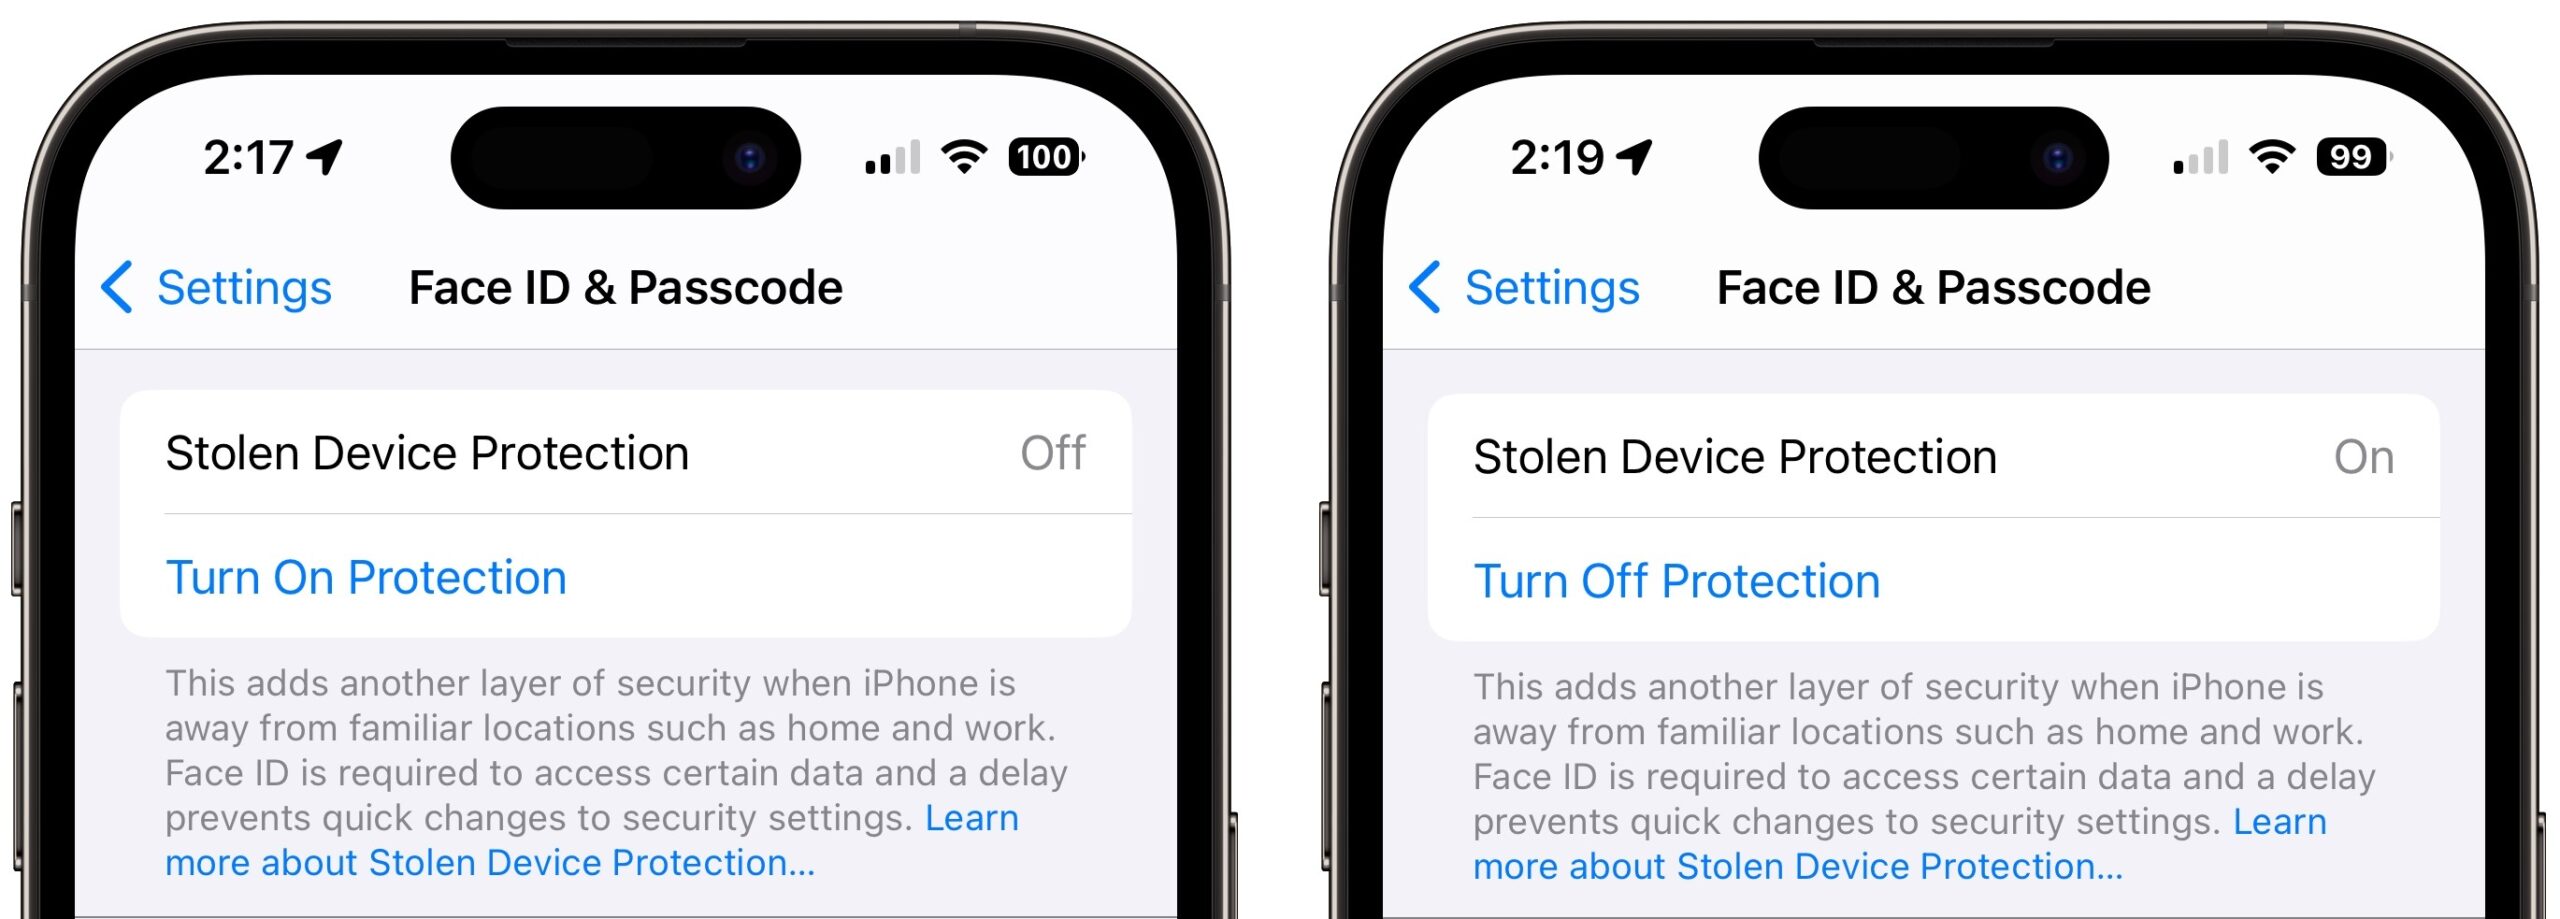 Stolen Device Protection toggle